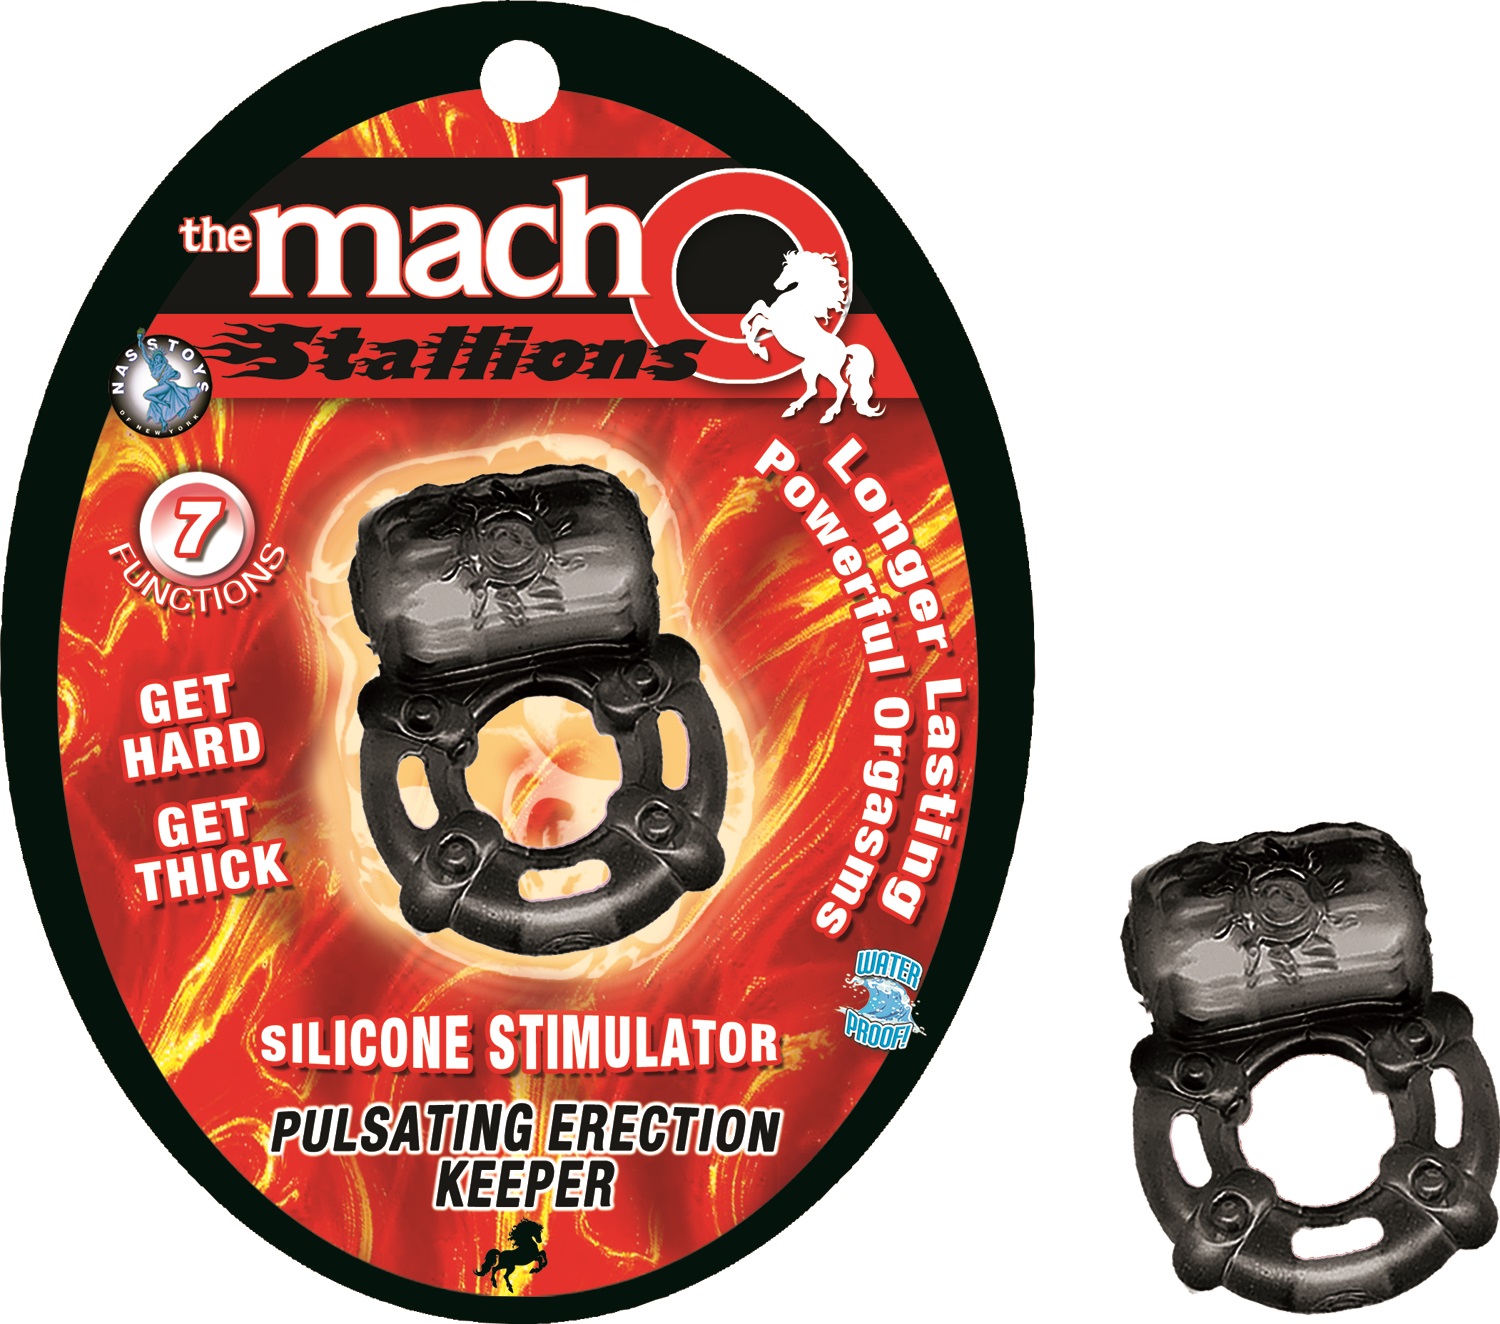 The+Macho+Stallions+Pulsating+Erection+Keeper+7+Functions+Silicone+Waterproof